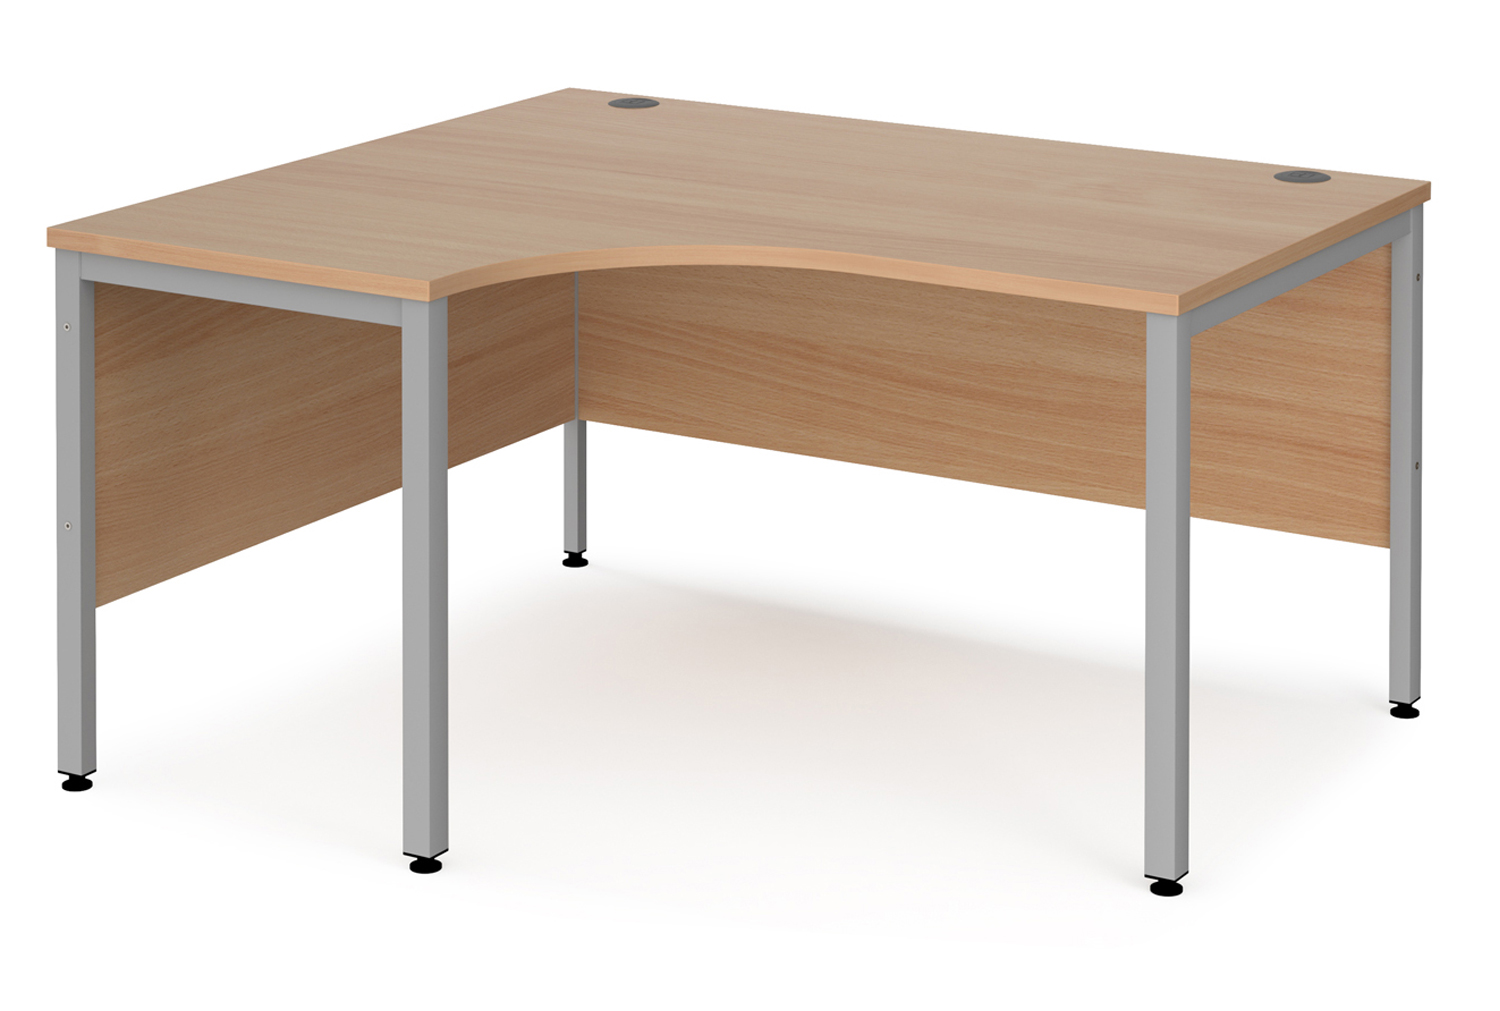 Value Line Deluxe Bench Left Hand Ergo Office Desks (Silver Legs), 140wx120/80dx73h (cm), Beech, Express Delivery